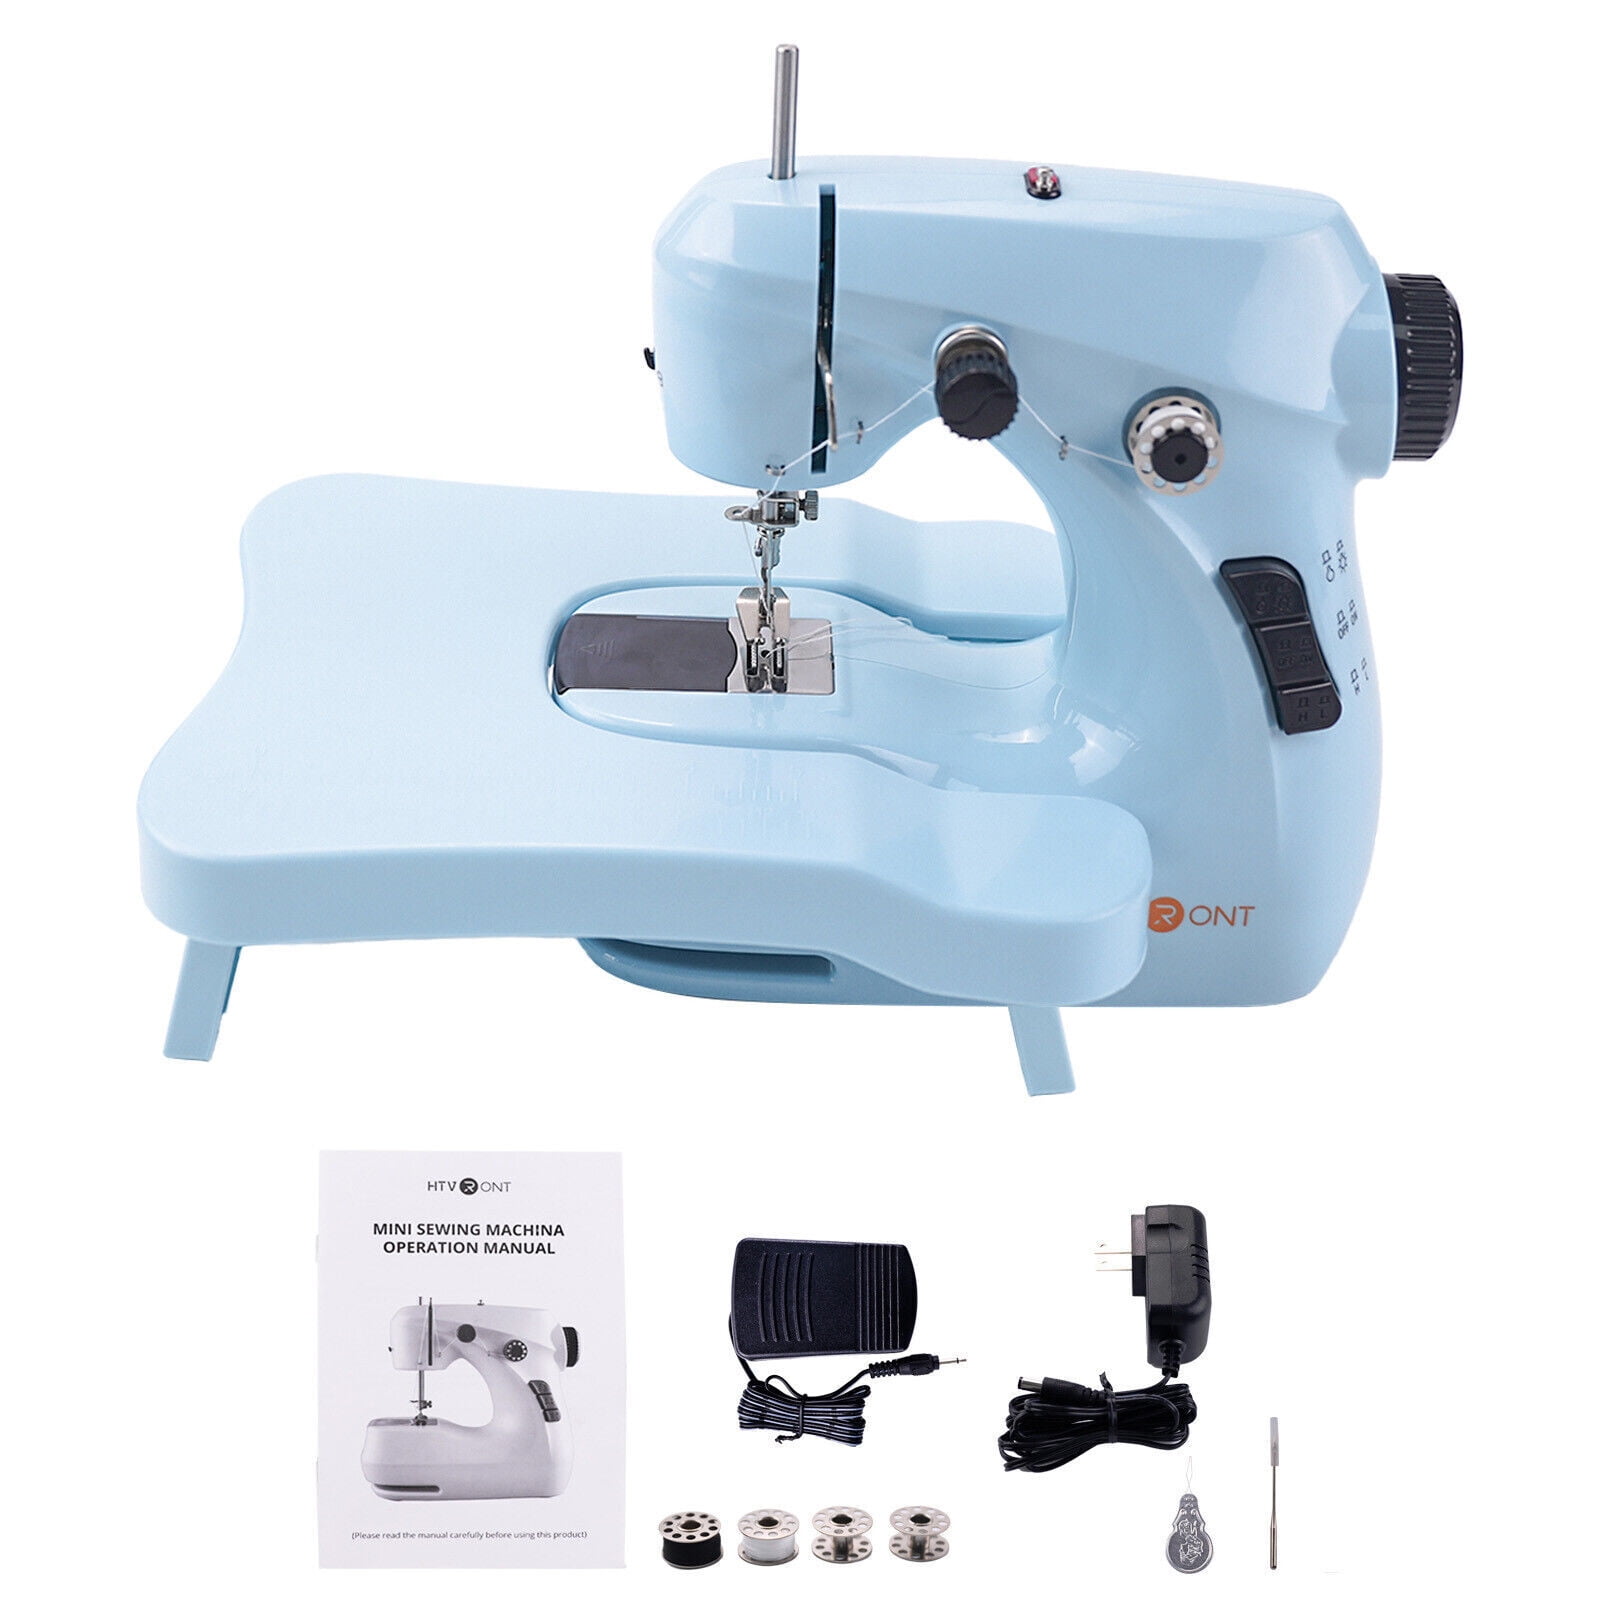  HTVRONT Mini Sewing Machine for Beginners - Portable Sewing  Machine with Extension Table, Foot Pedal, Light, 42 Pcs Sewing Set, etc.  Dual Speed Small Sewing Machine for Beginners and Kids